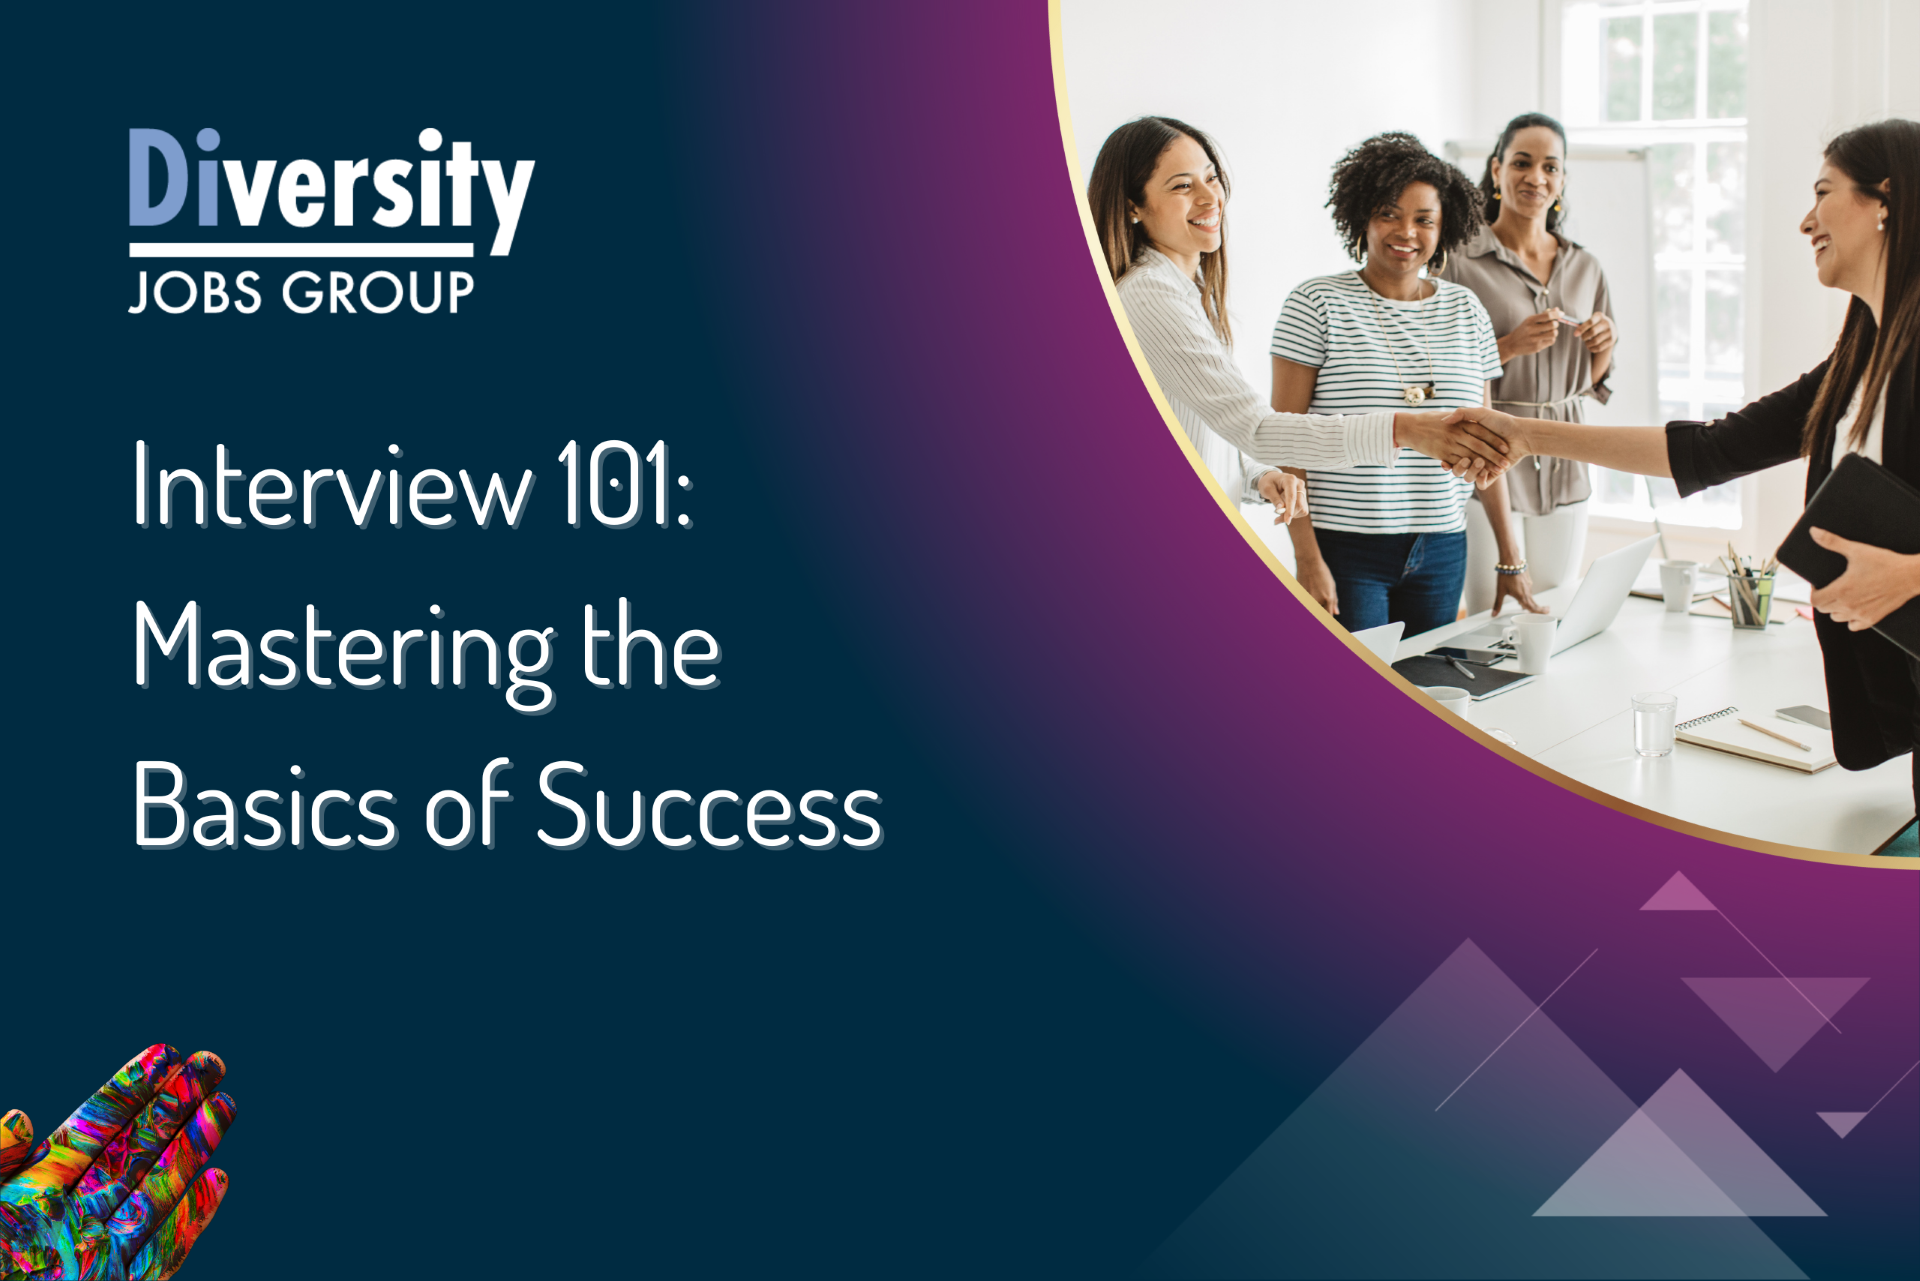 Interview 101: Mastering the Basics for Success